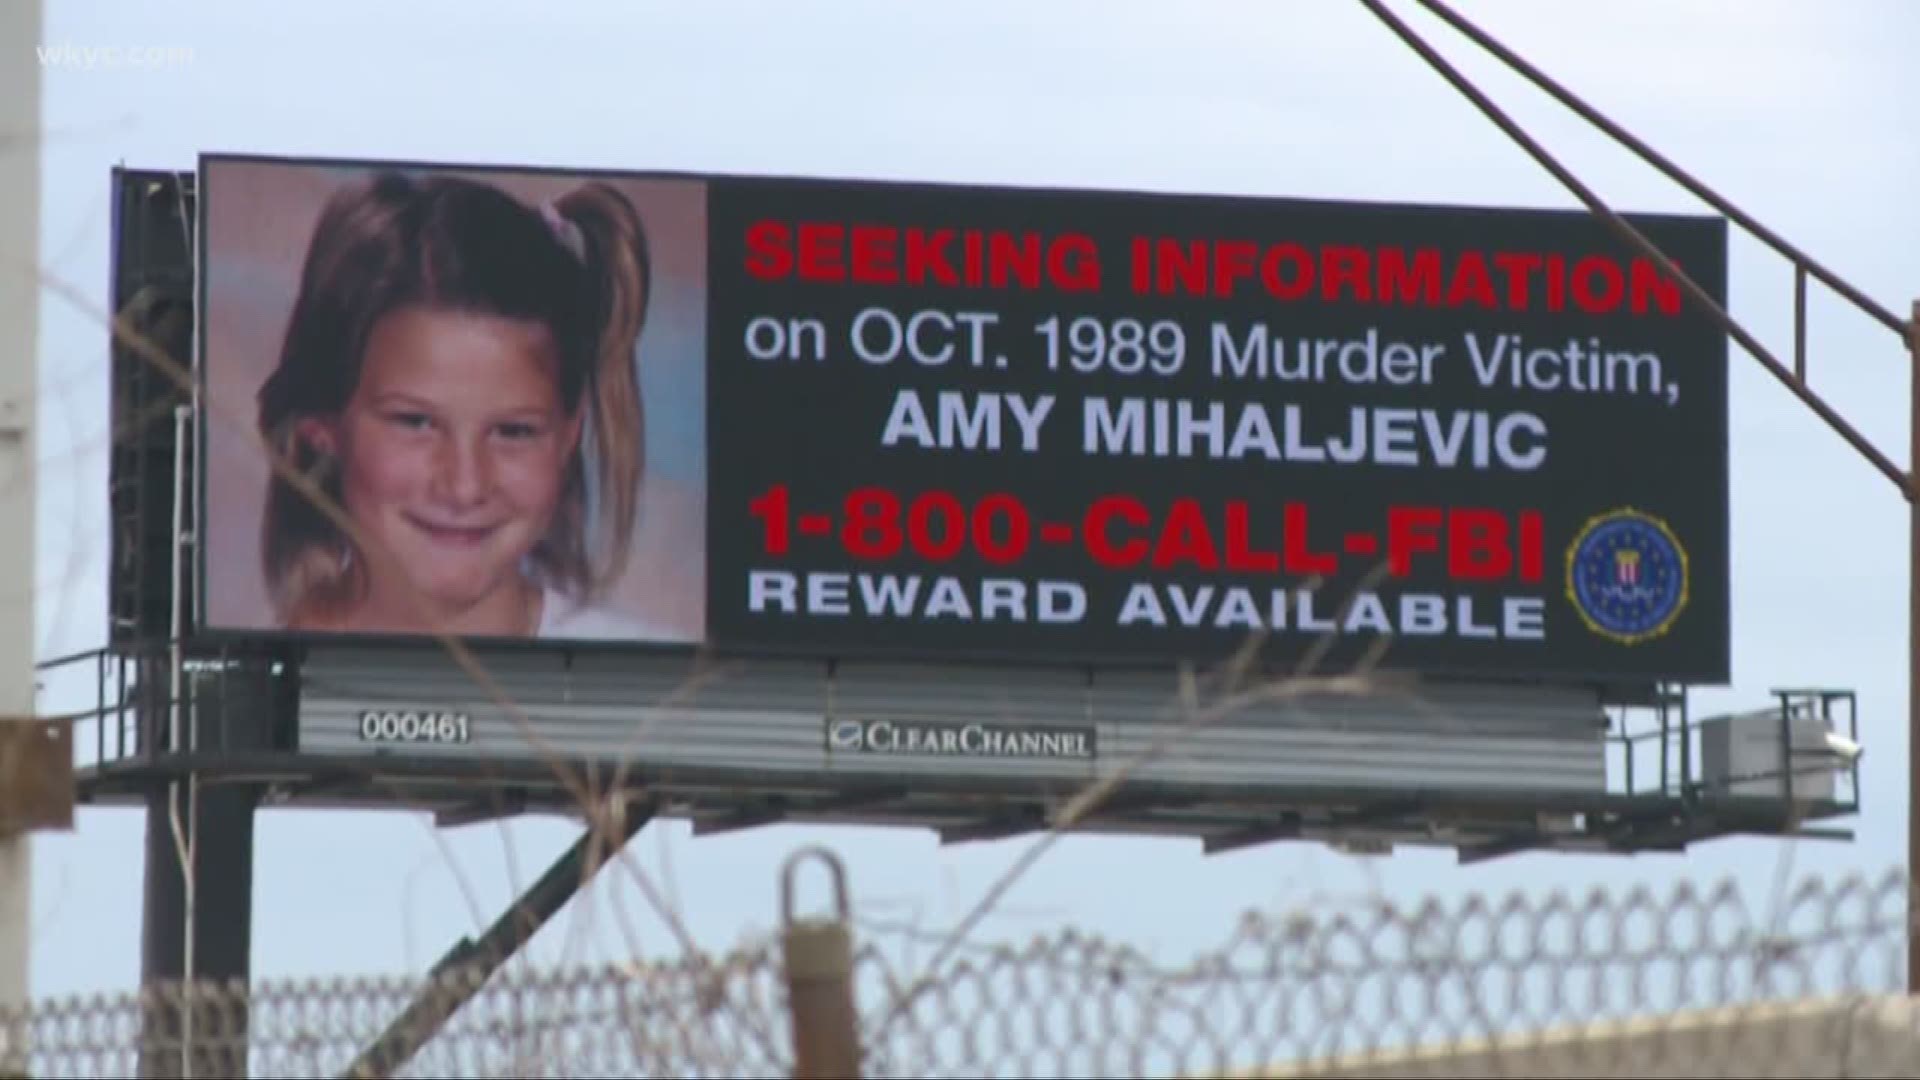 Mihaljevic documentary on Investigation Discovery sparks new tips in unsolved murder case